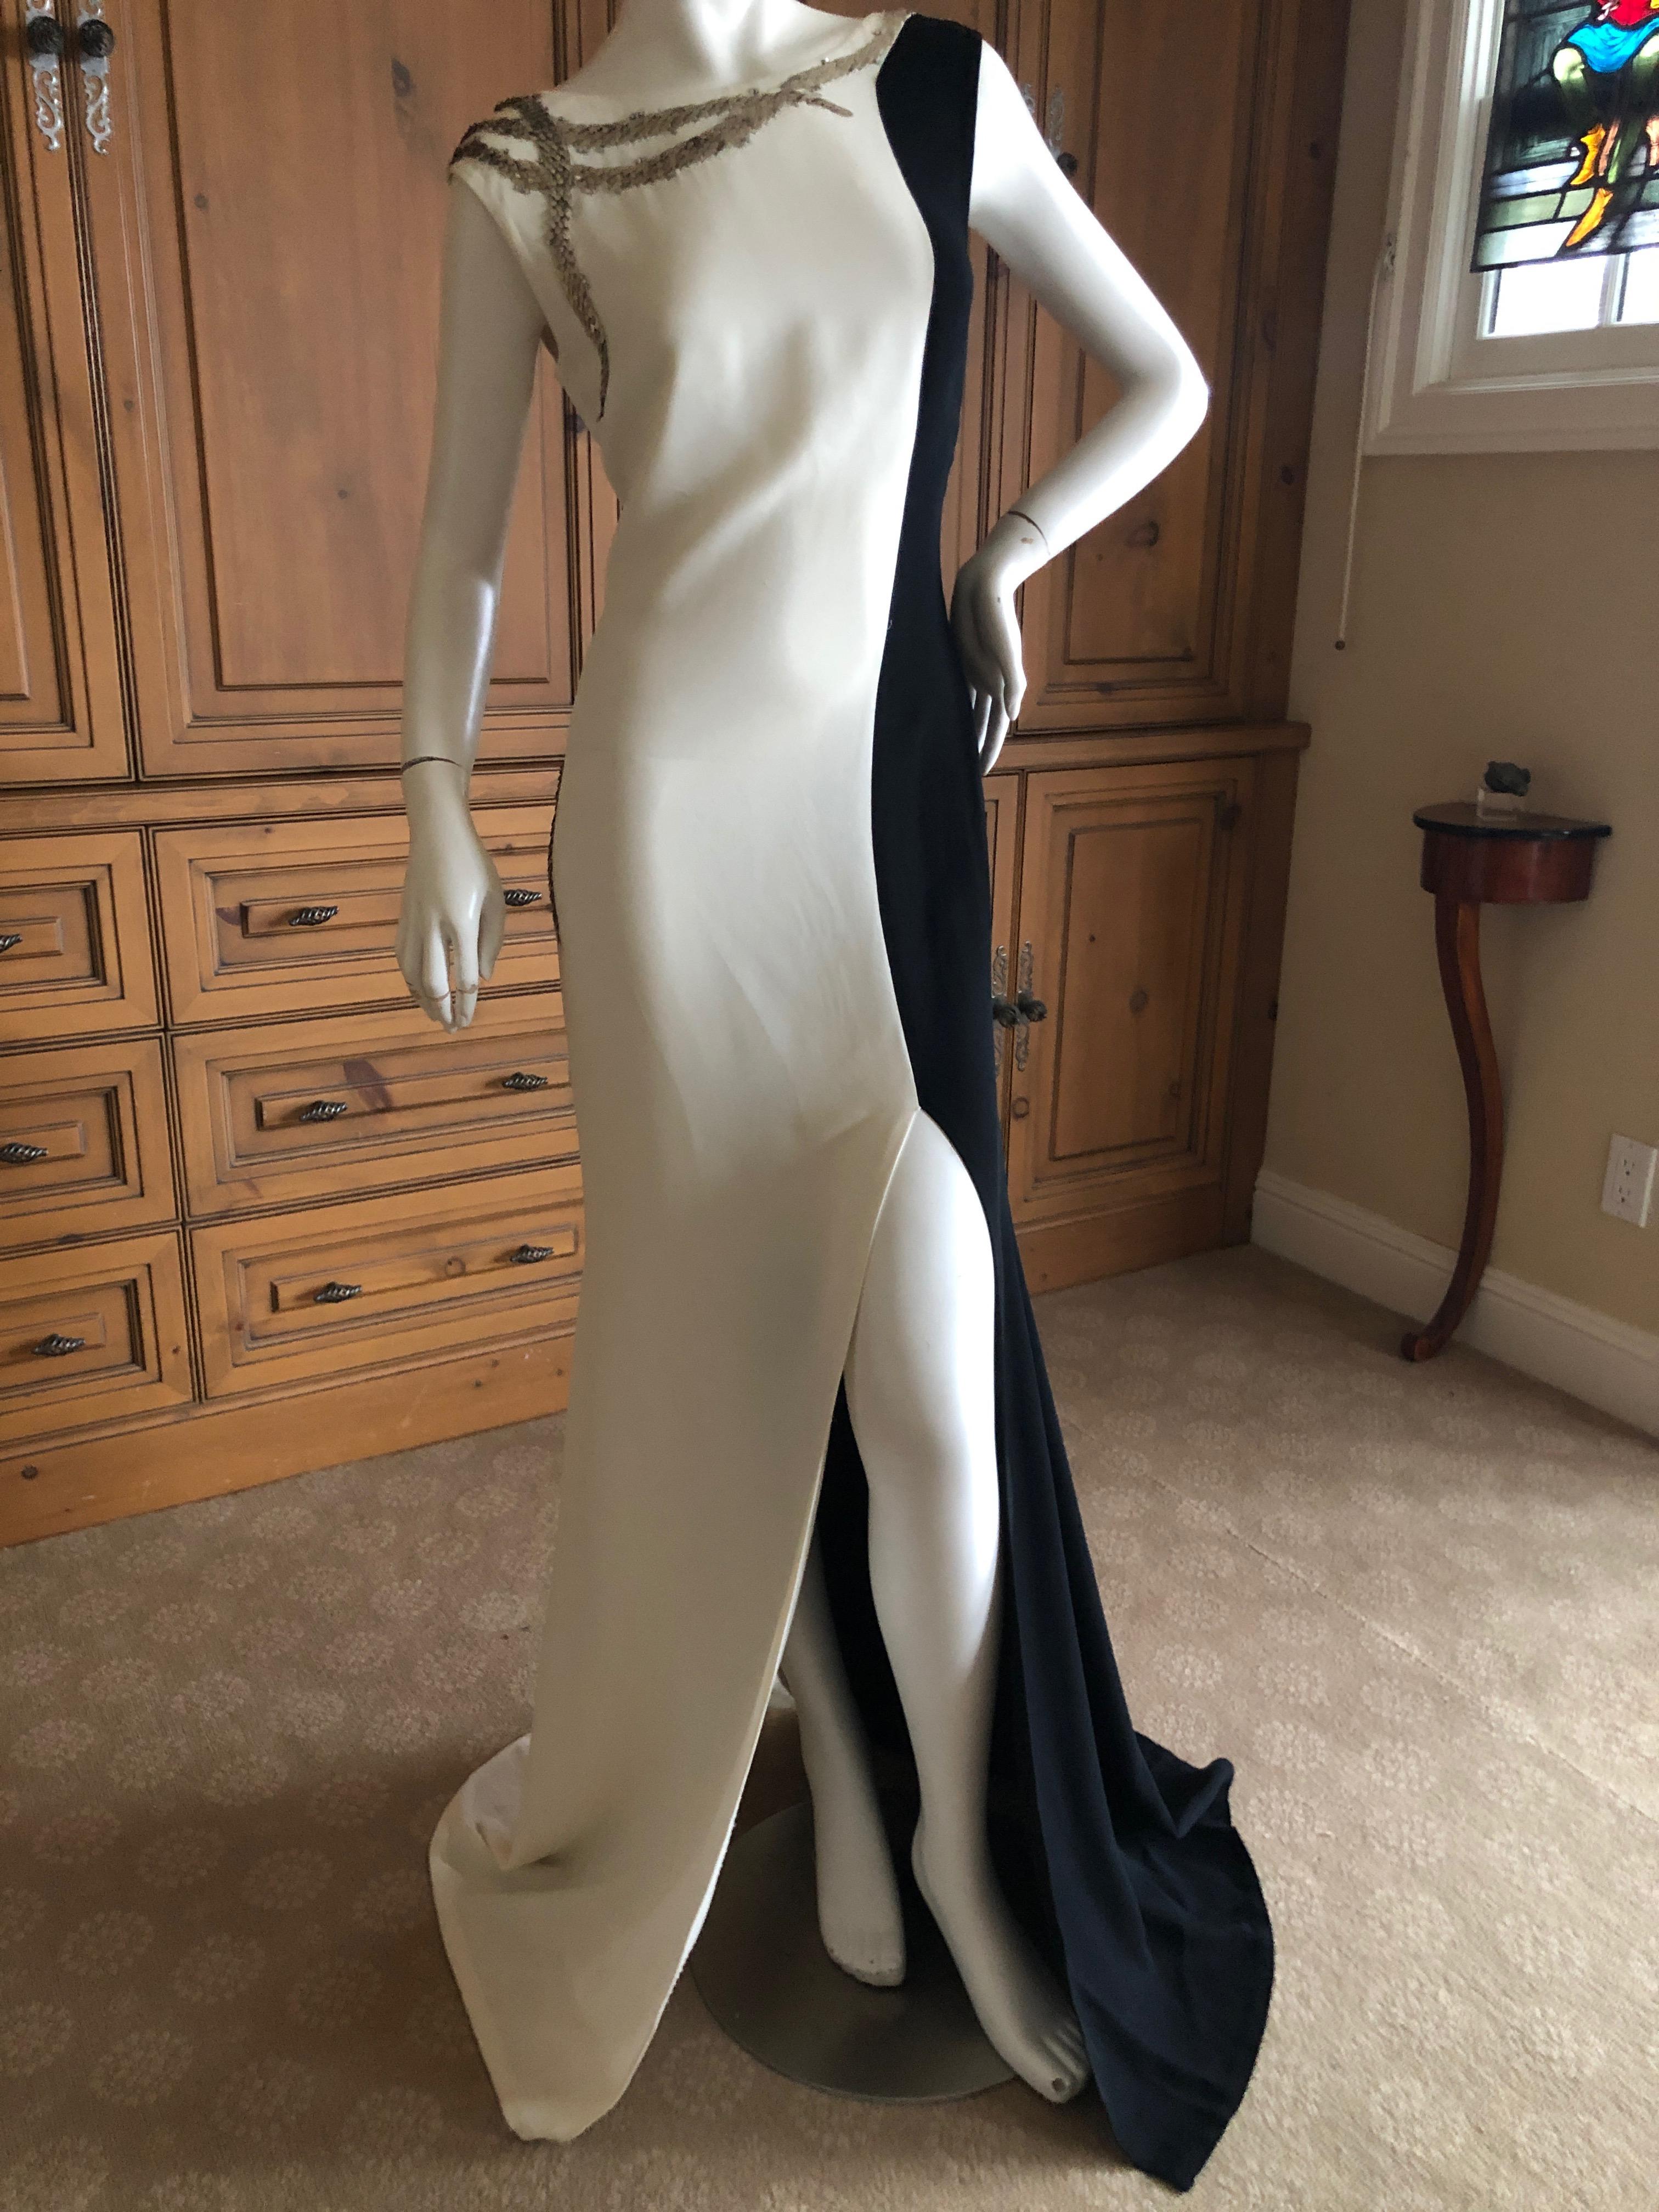 Oscar de la Renta Black and White Gown with Silver Snake Scale Sequin Details
Simply Stunning. Please use the zoom feature to see al the remarkable details.
New with tags
Size 8
 Bust 38